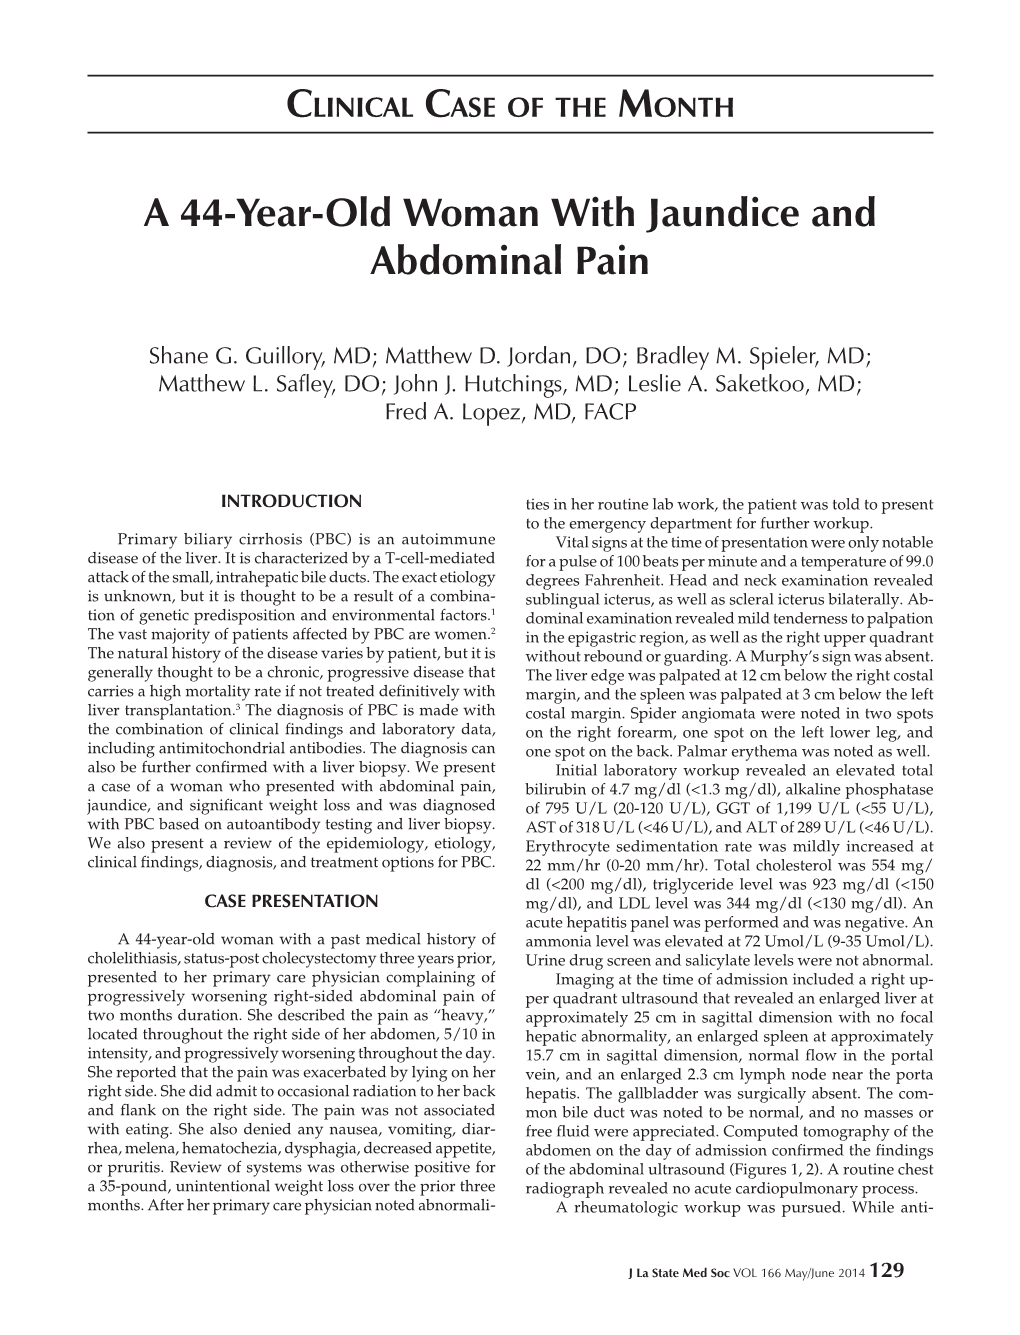 A 44-Year-Old Woman with Jaundice and Abdominal Pain